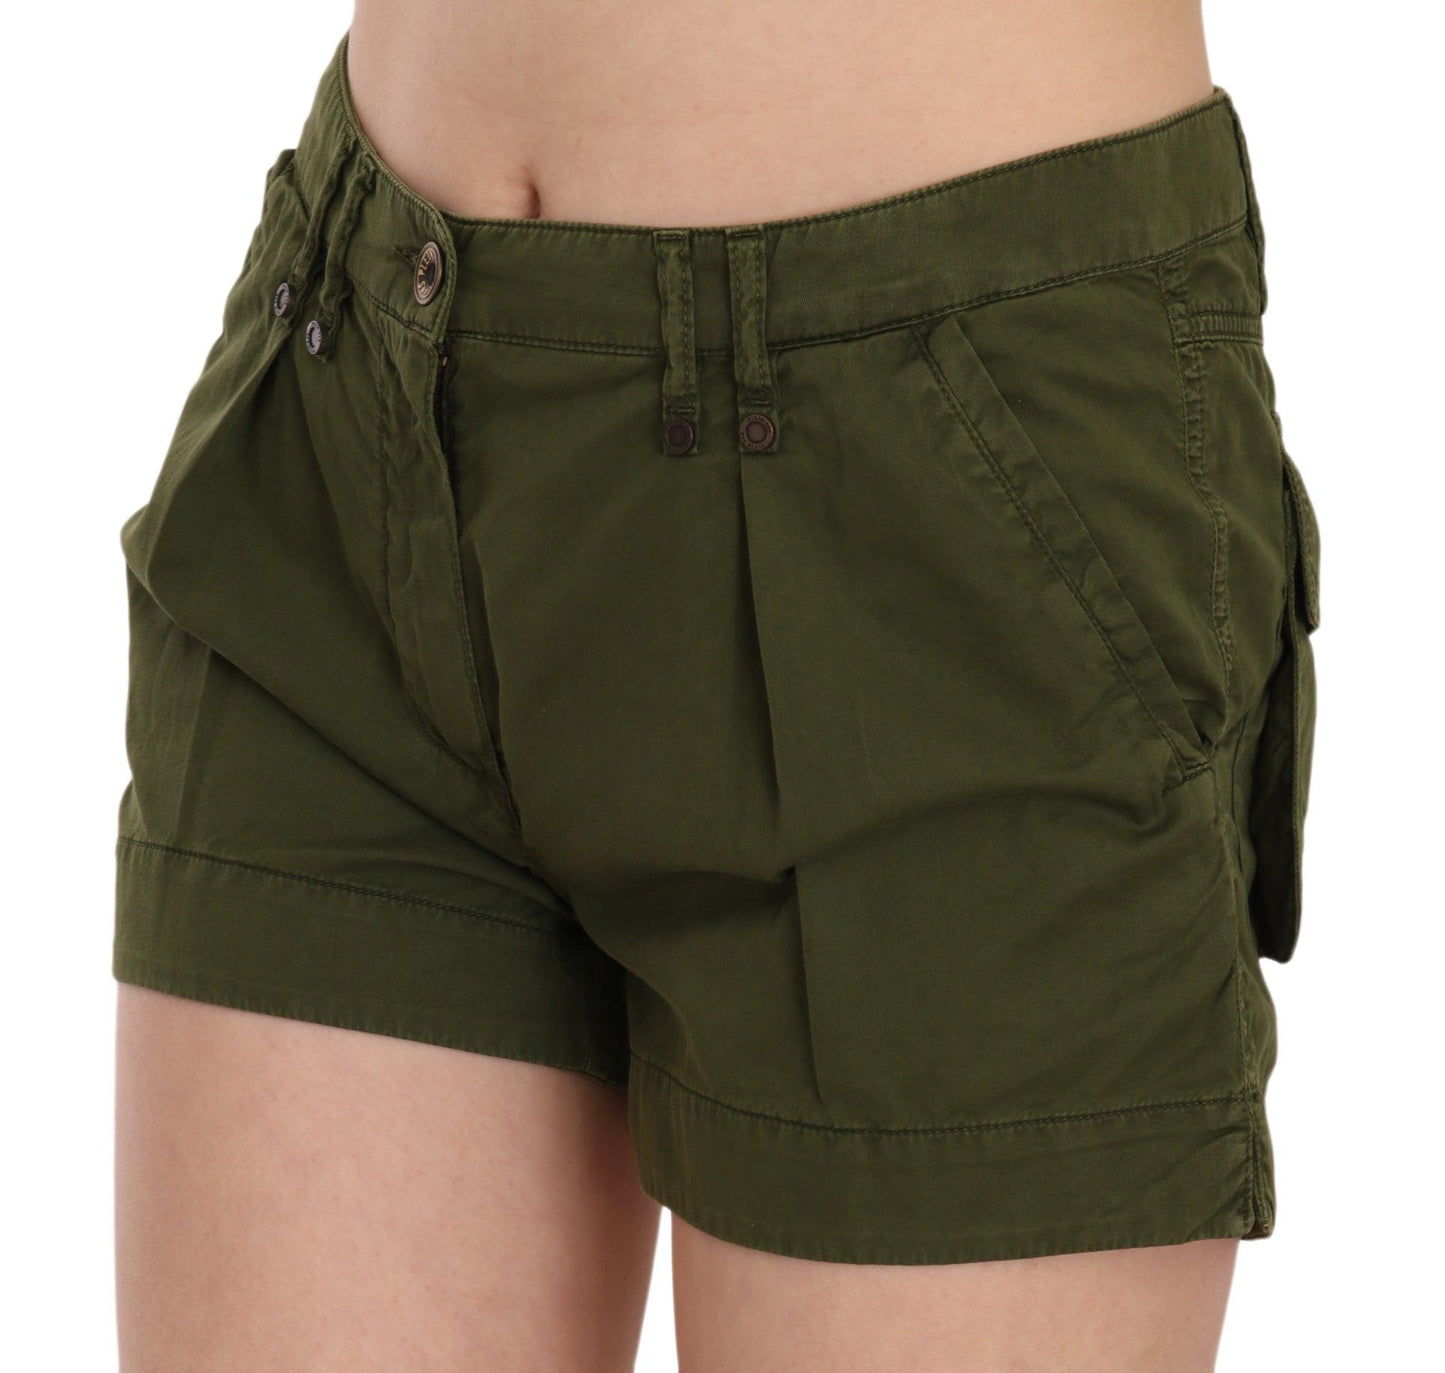 Green Mid Waist 100% Cotton Mini Shorts designed by PLEIN SUD available from Moon Behind The Hill's Women's Clothing range